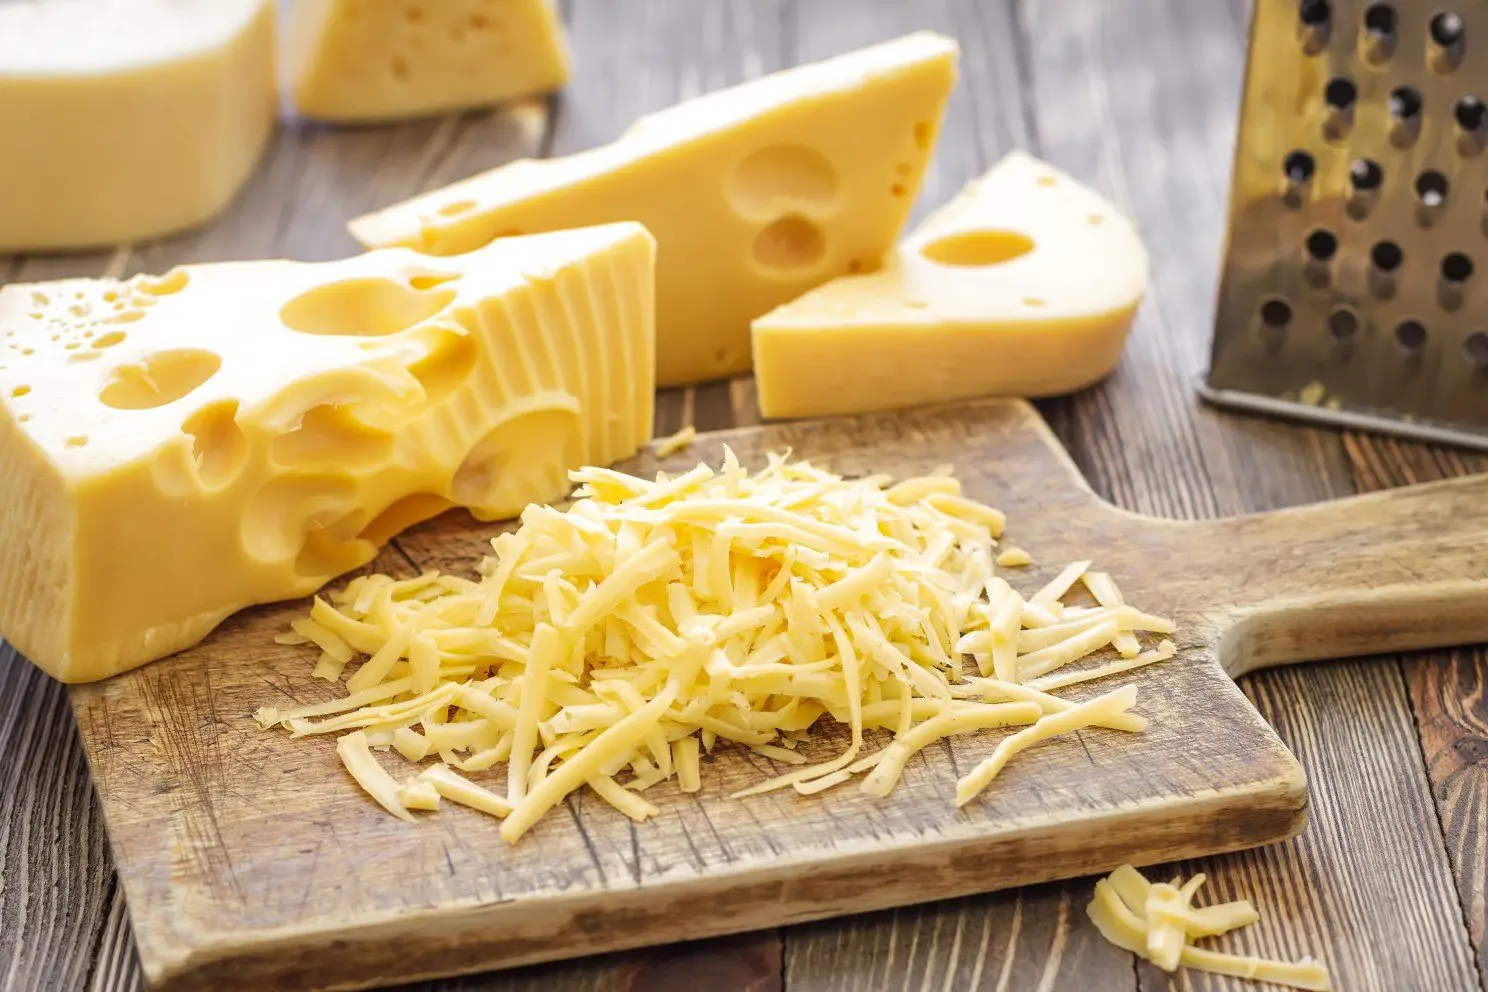 Science: Eating lots of cheese may help you lose weight